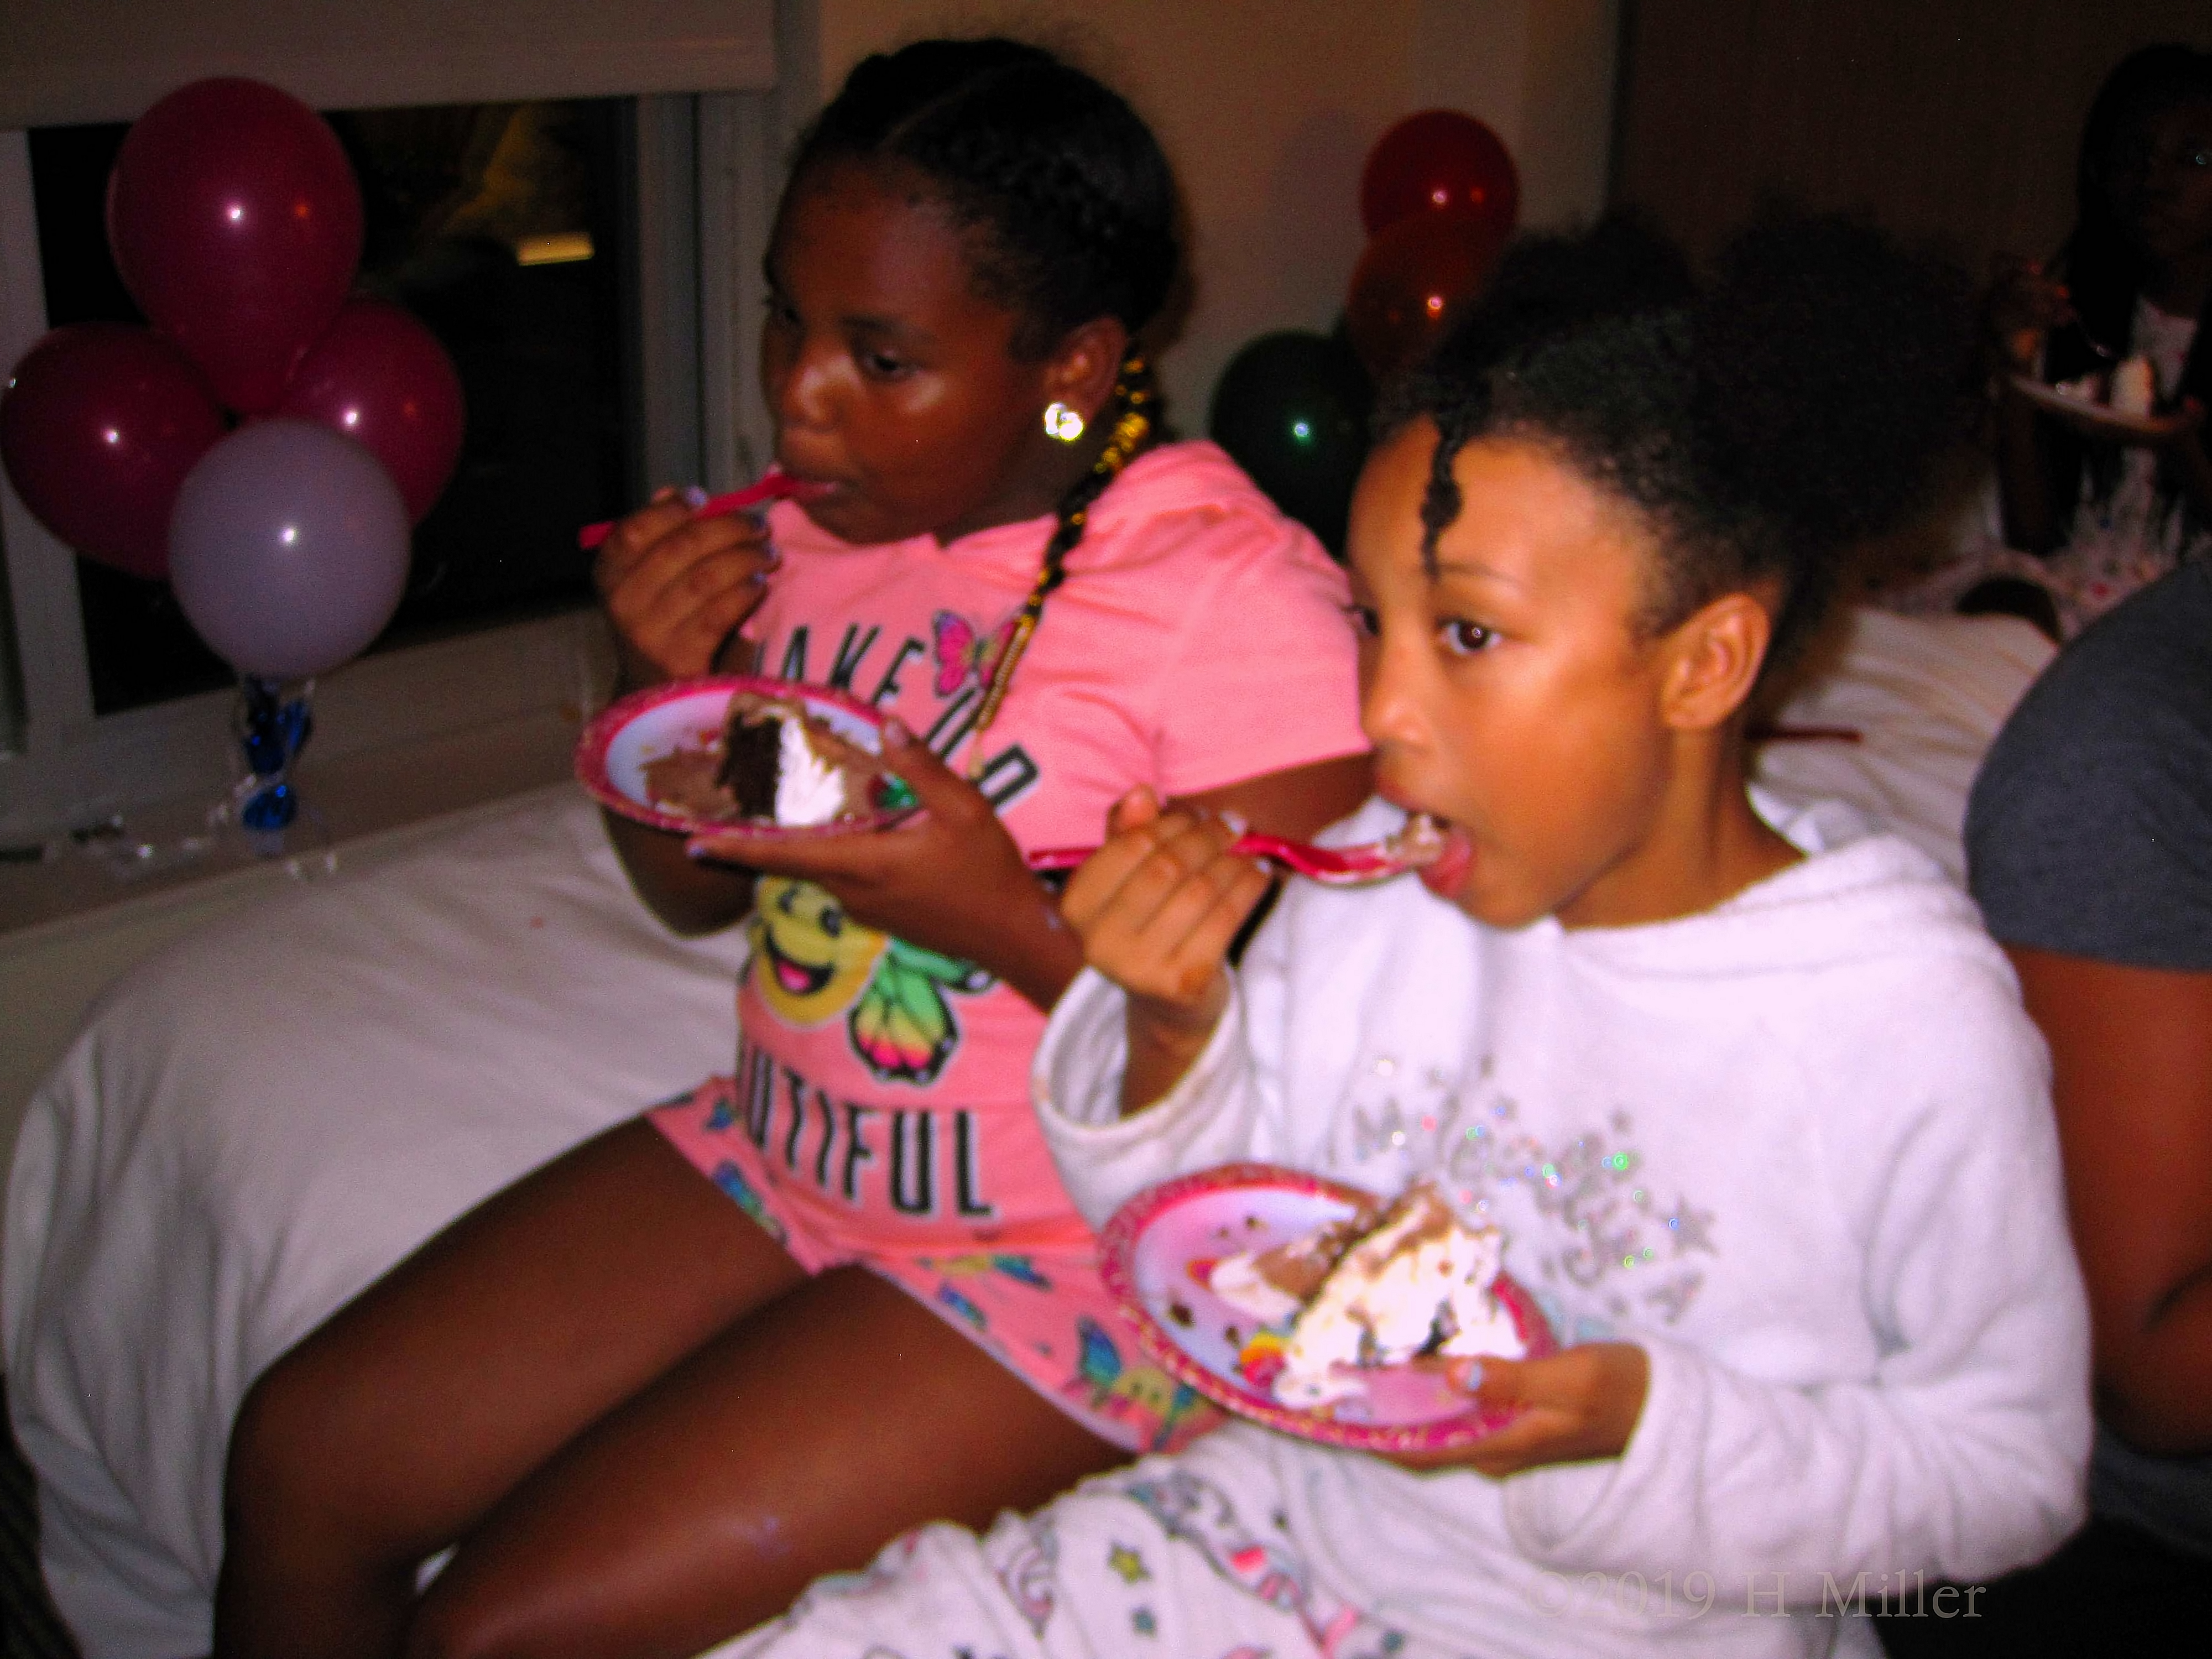 Spa Birthday Party For Girls For Nicole And Michelle At Home In New Jersey 